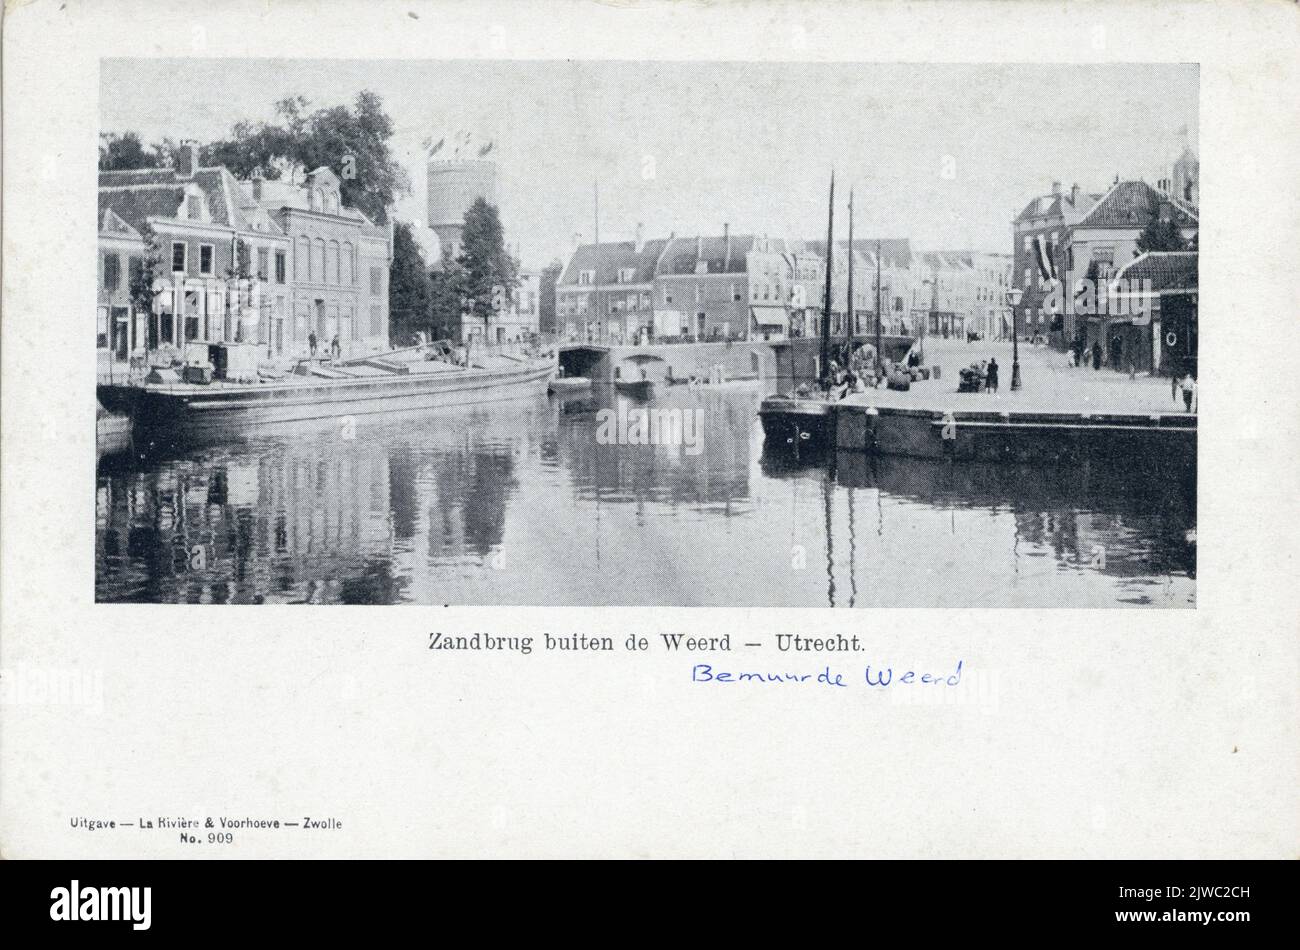 View of the Stadsbuitengracht in Utrecht with the Bemuurd Weerd O.Z. And the Weerdbrug, in the background the Oudegracht Weerdzijde and on the right the Nieuwekade. Stock Photo